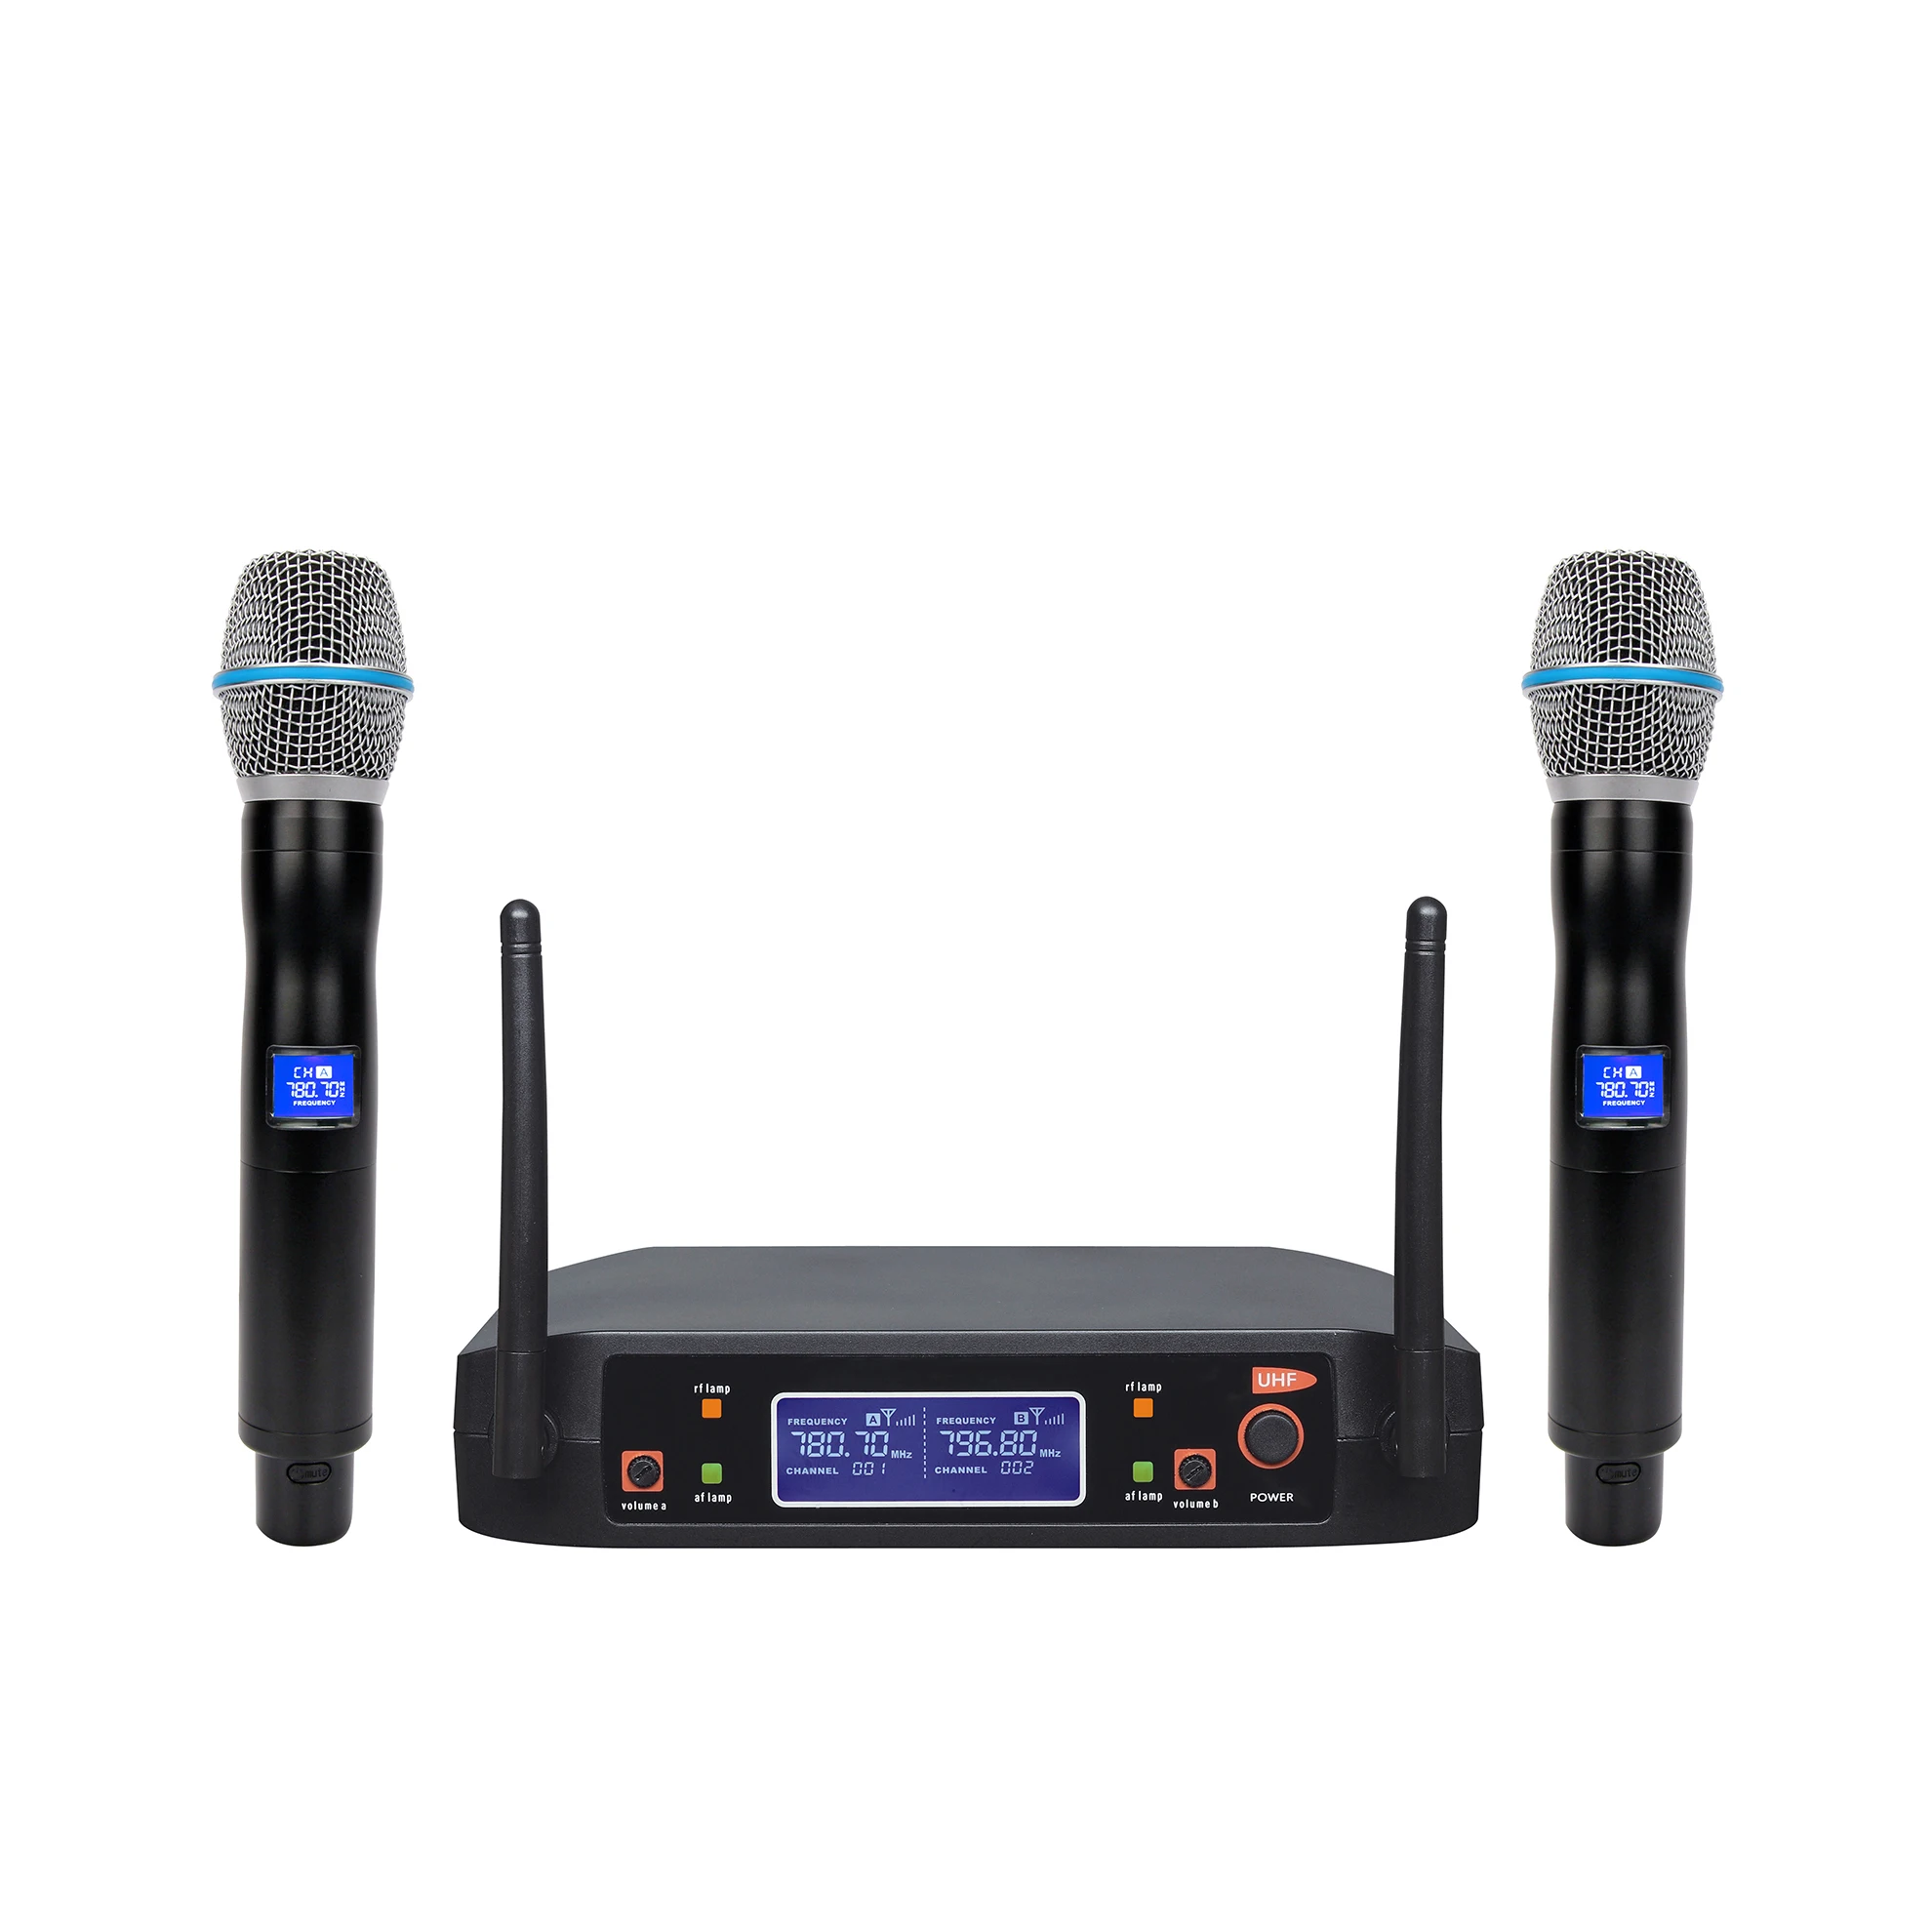 Hot sale professional wireless microphone mini portable handheld stage microphone, shur microphone.